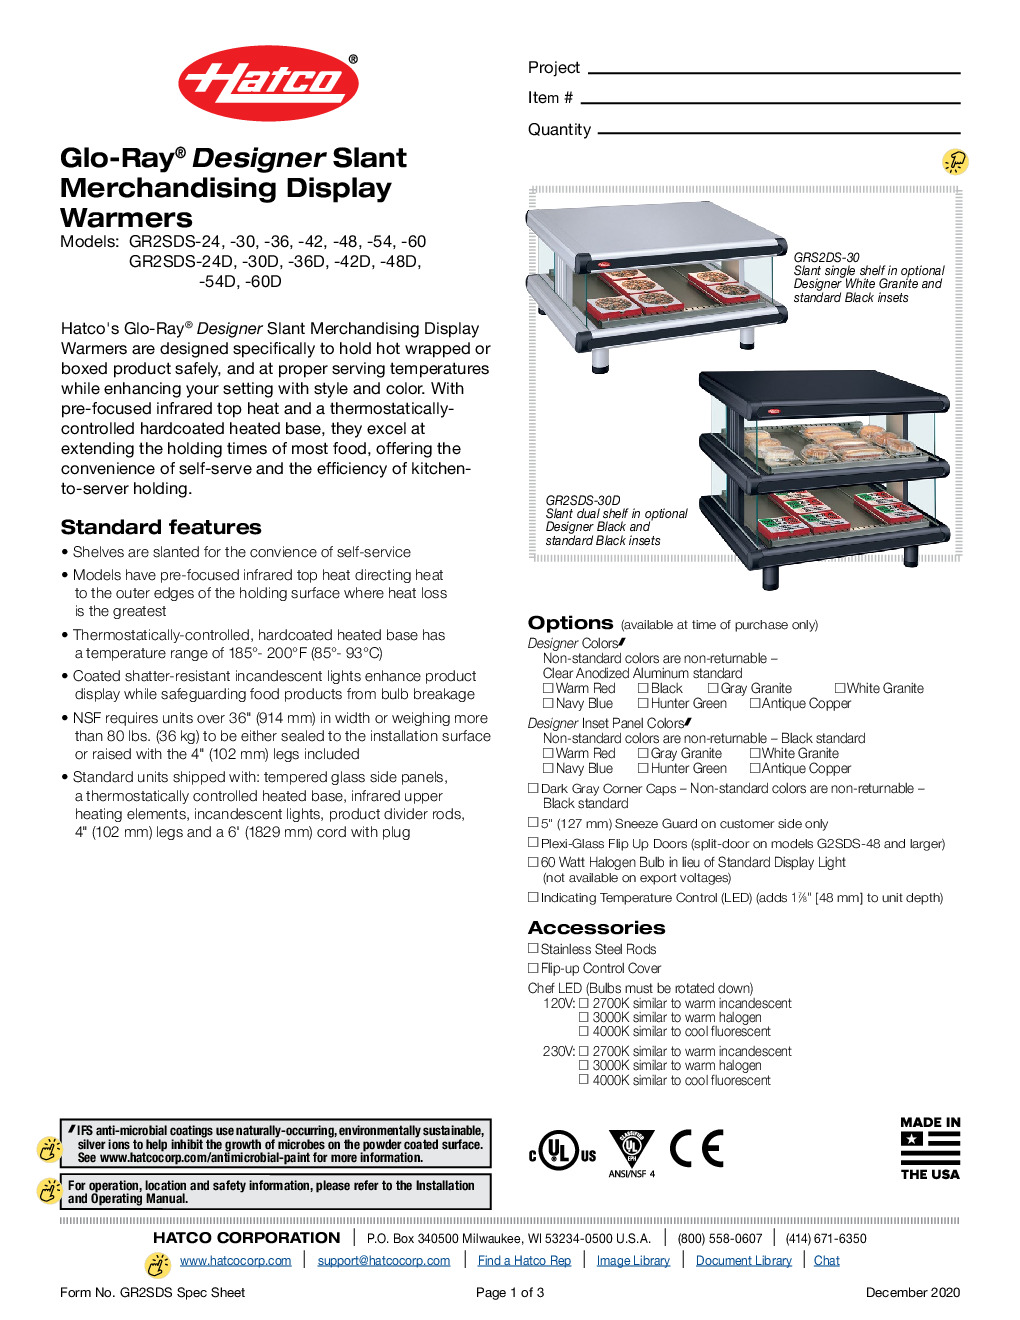 Hatco GR2SDS-36D For Multi-Product Heated Display Merchandiser